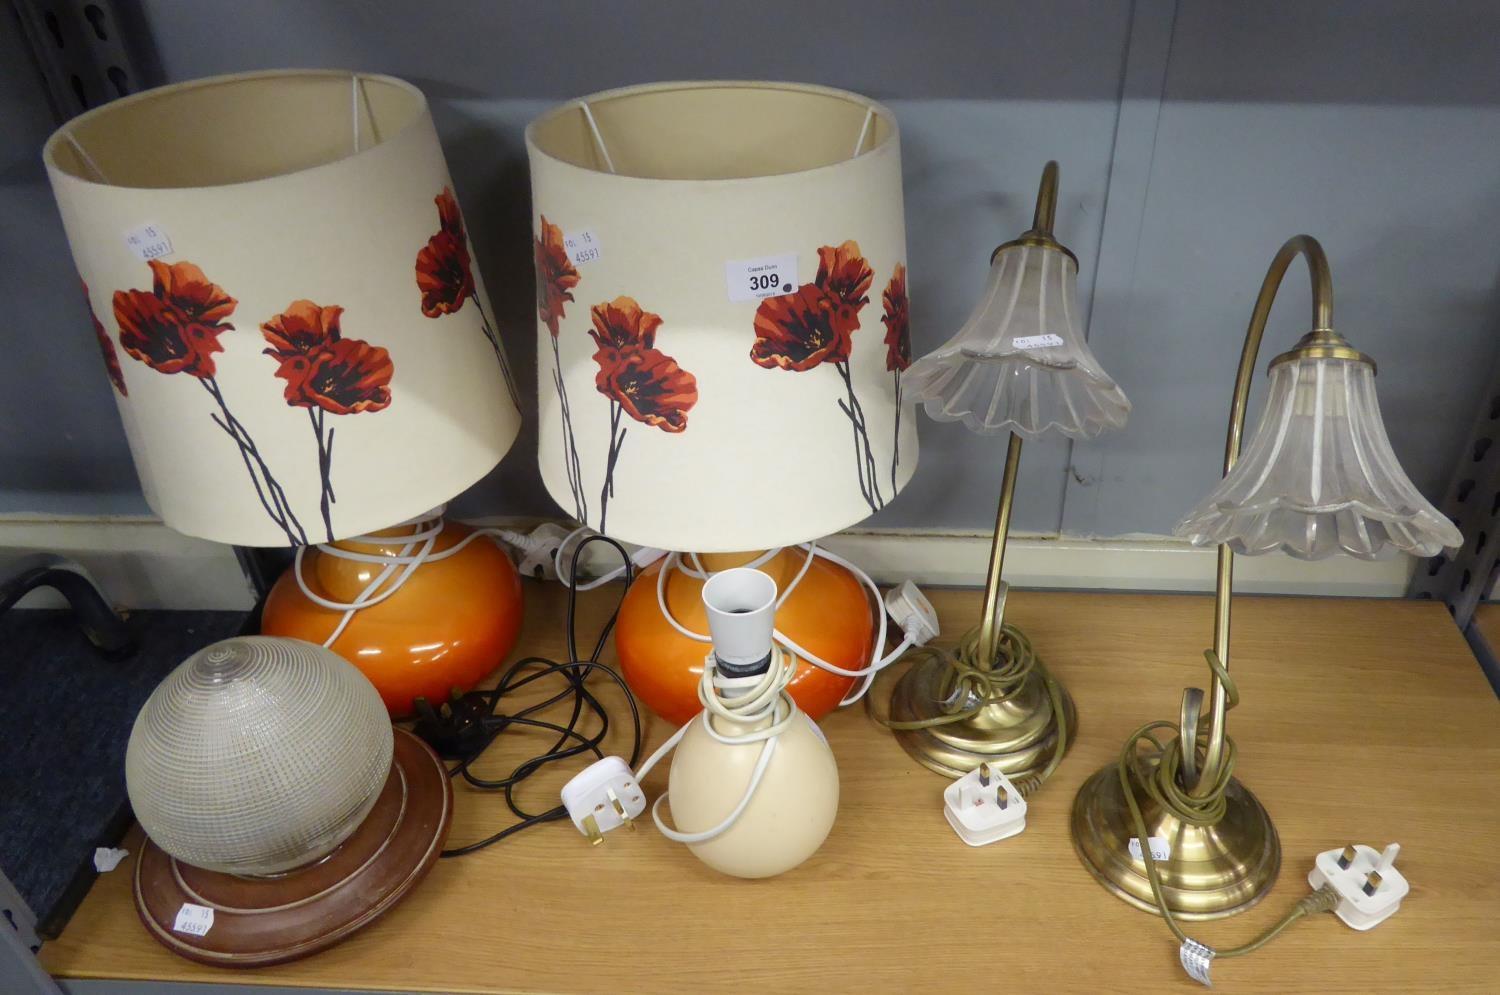 PAIR OF LAMPS WITH ORANGE CERAMIC BASES WITH SHADES, TWO BRASS TOUCH CONTROL LAMPS WITH GLASS SHADES